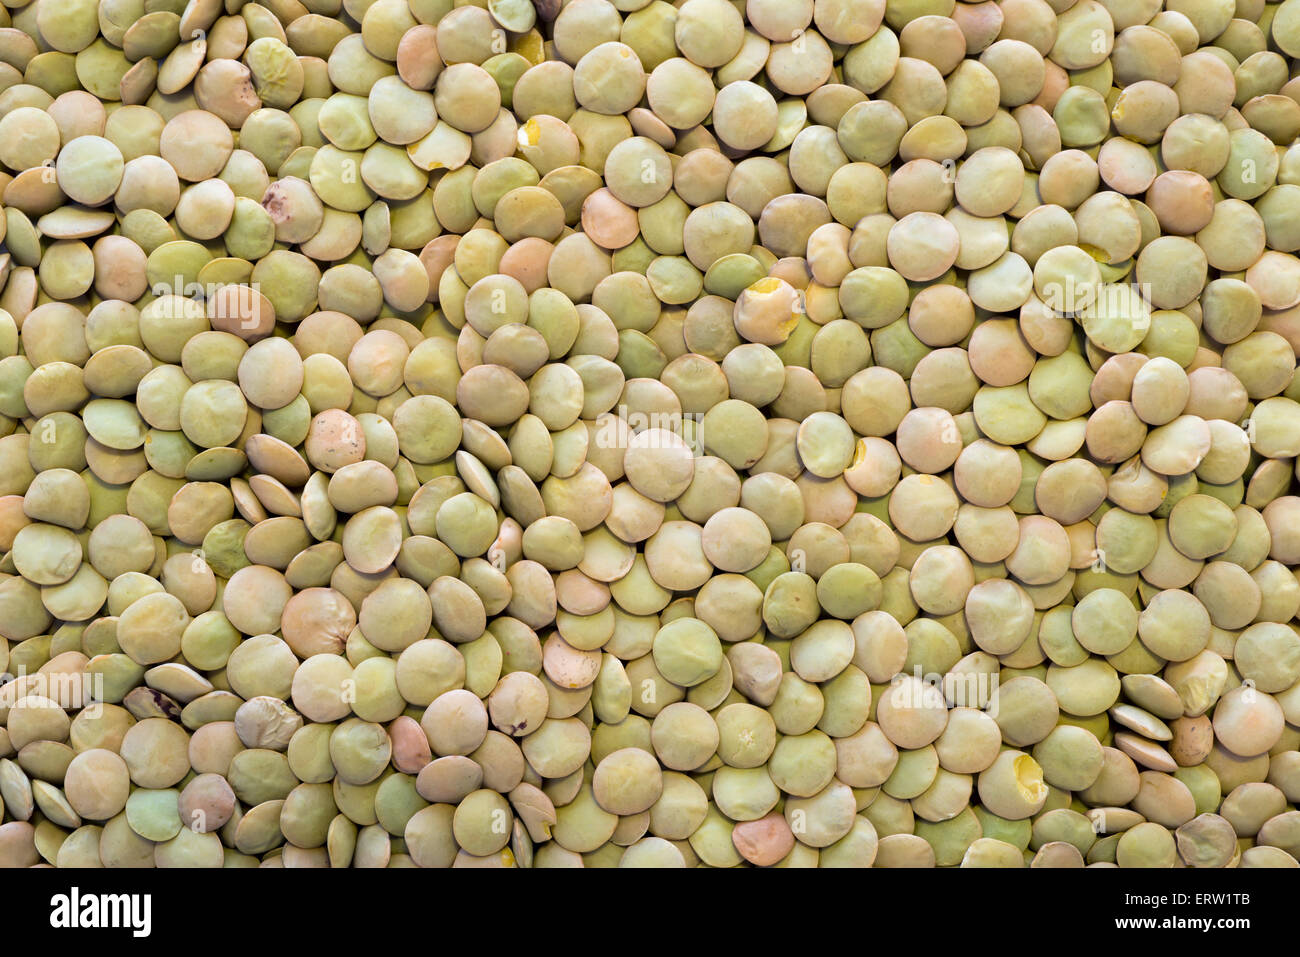 many dry green lentil seeds background Stock Photo